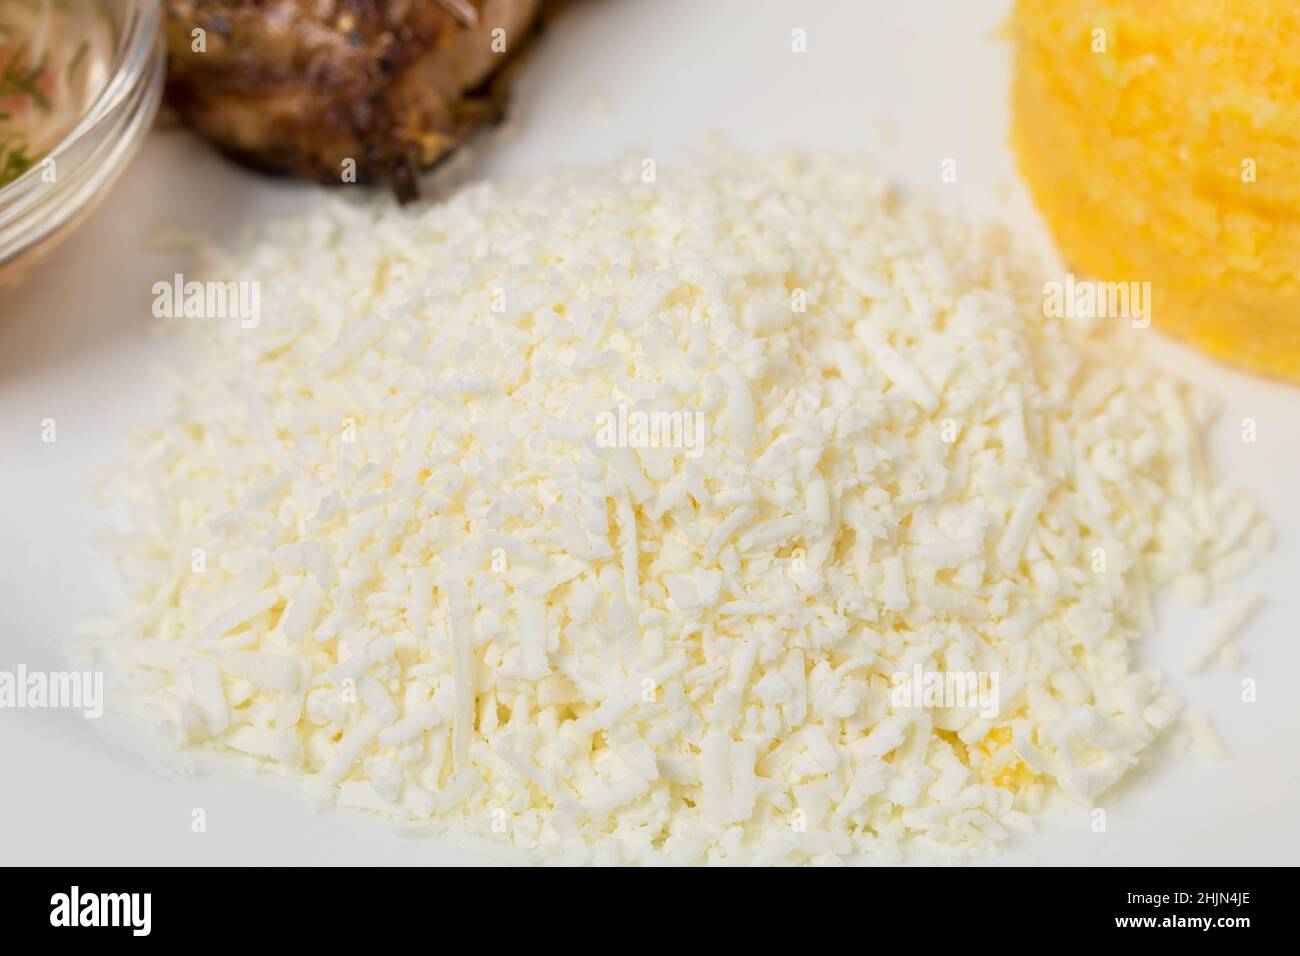 Traditional moldovan mamaliga porridge. Can be used as a whole background. Stock Photo